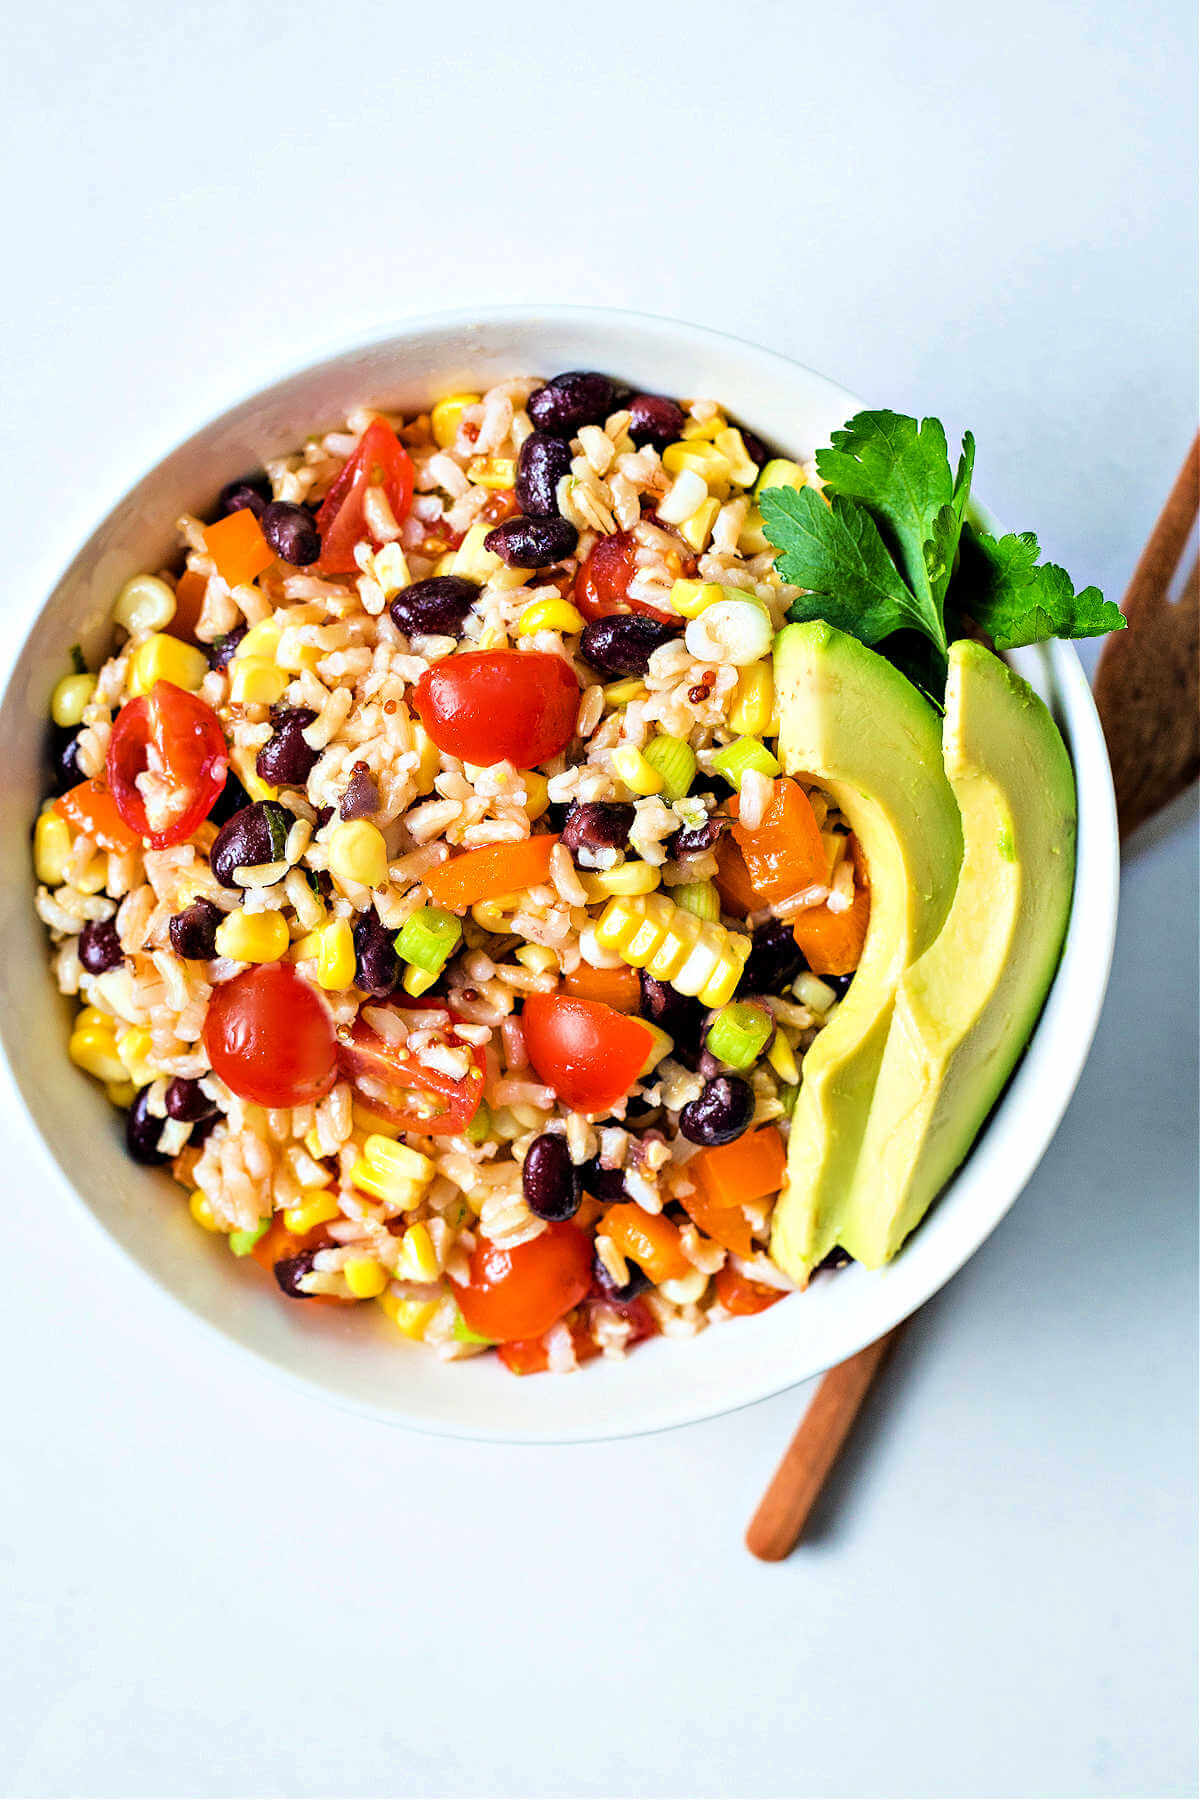 Santa Fe rice salad in a bowl with slices of avocado.